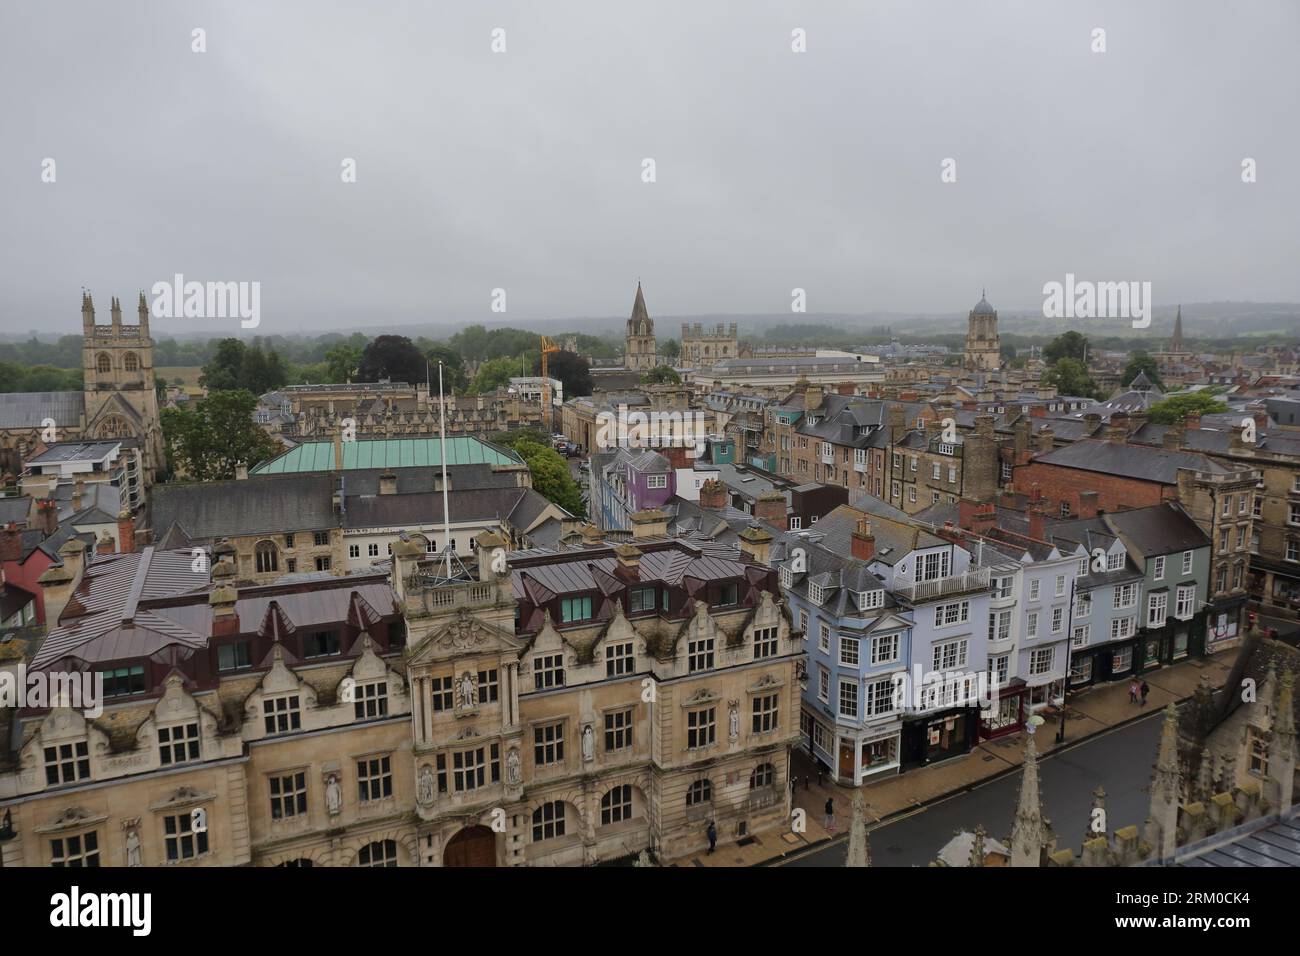 the beautiful view from the tower of University Church of St Mary the Virgin, Oxford, UK Stock Photo